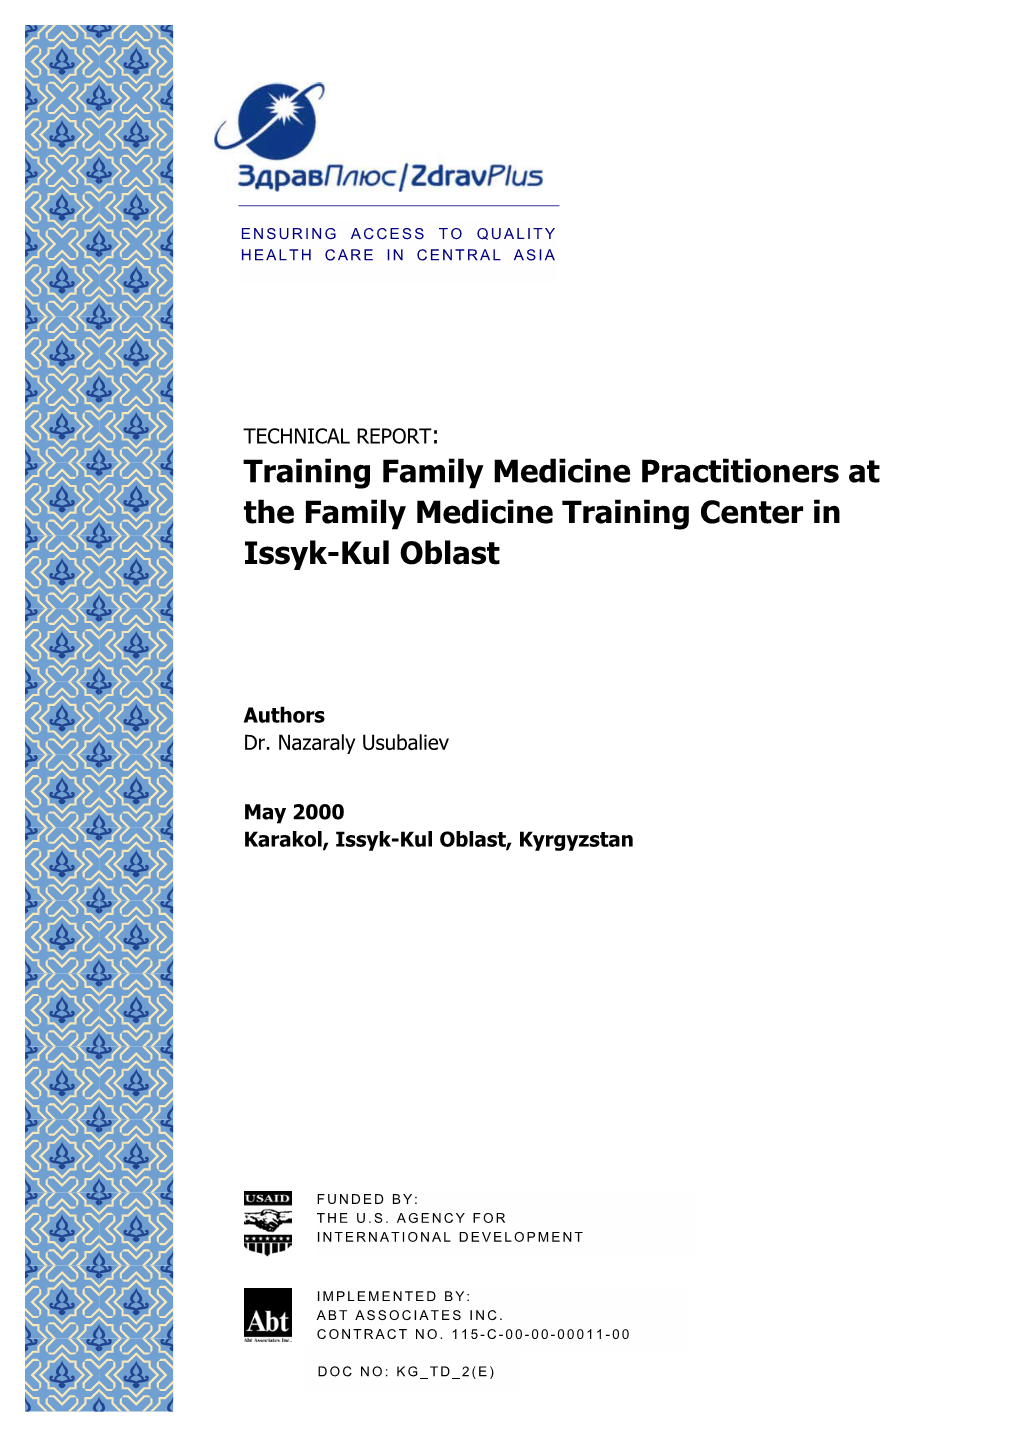 Training Family Medicine Practitioners at the Family Medicine Training Center in Issyk-Kul Oblast